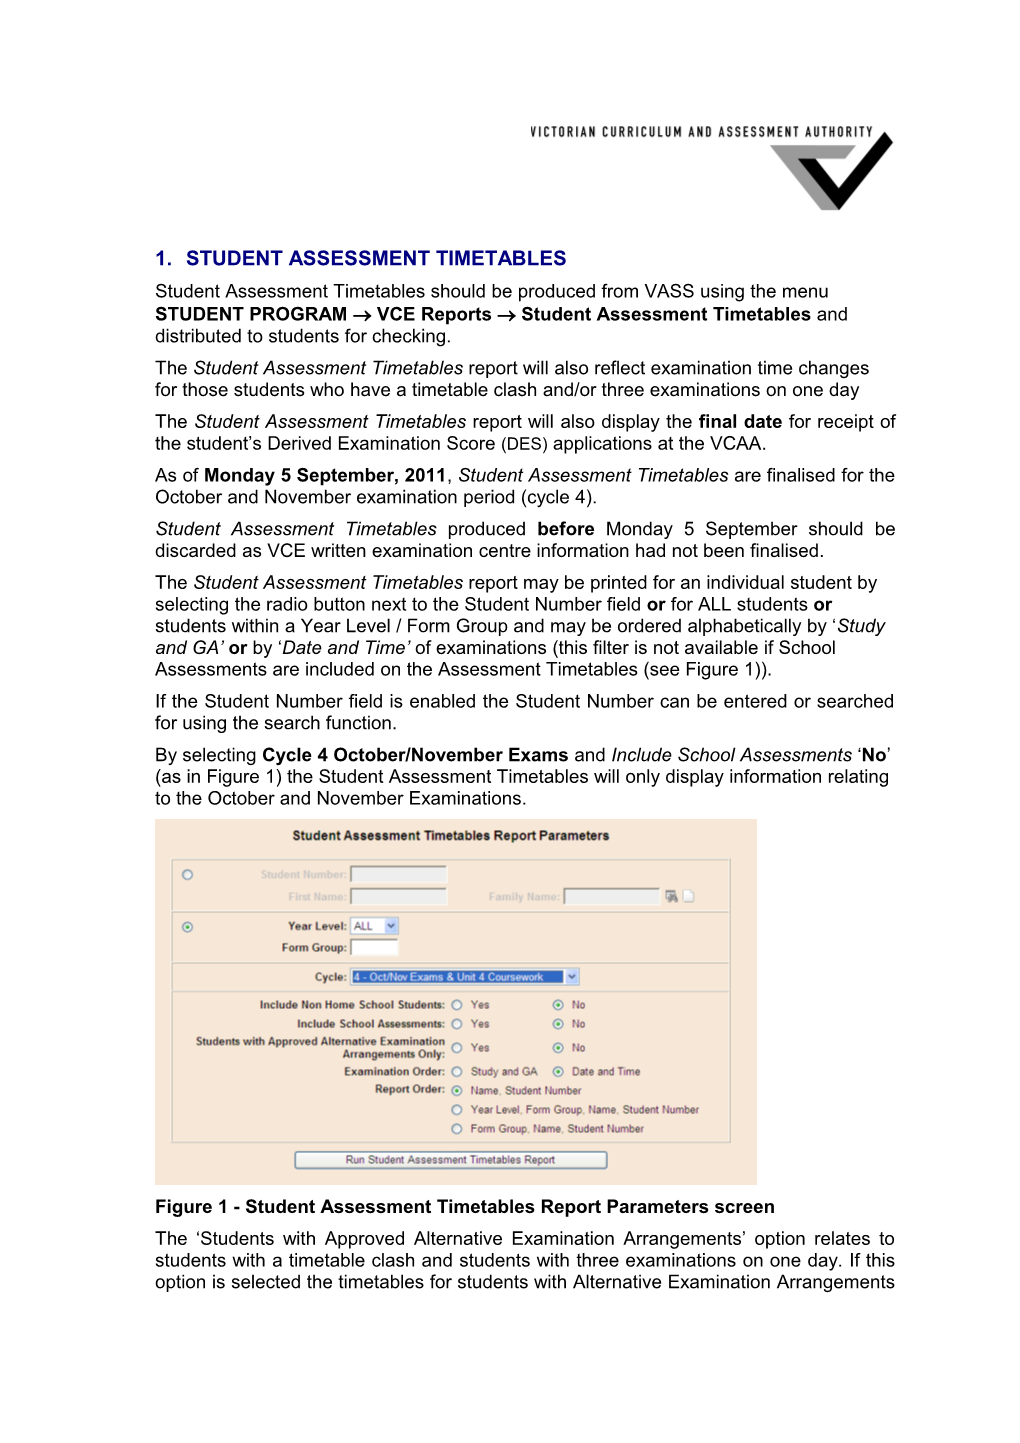 Student Assessment Timetables and Special Arrangements Advice Slips